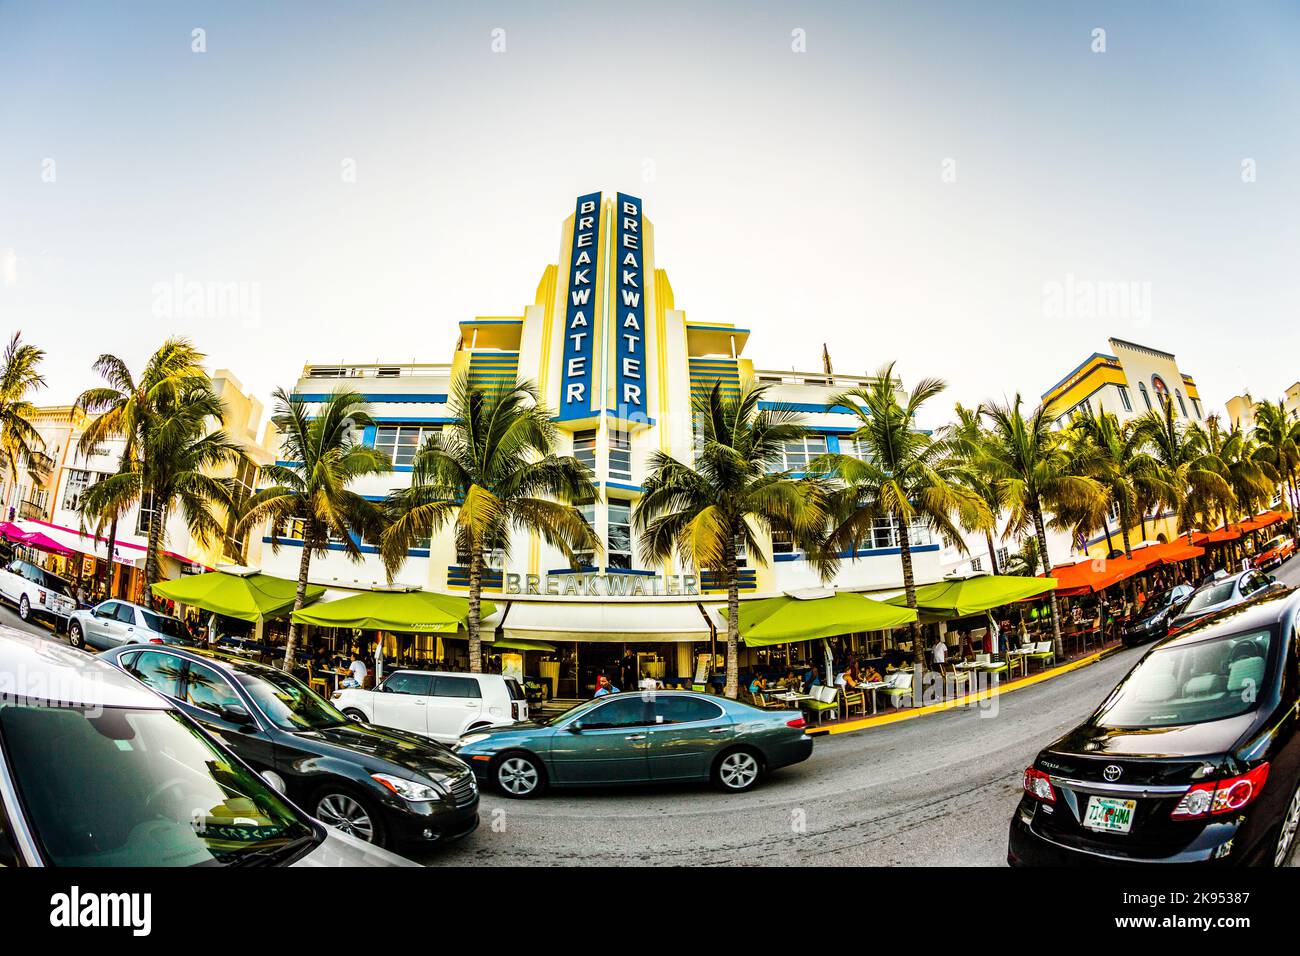 MIAMI, USA - July 31:  famous Breakwater hotel located at  Ocean Drive was built in the 1930's in South Beach July 31 2013 in Miami, USA. Most of the Stock Photo